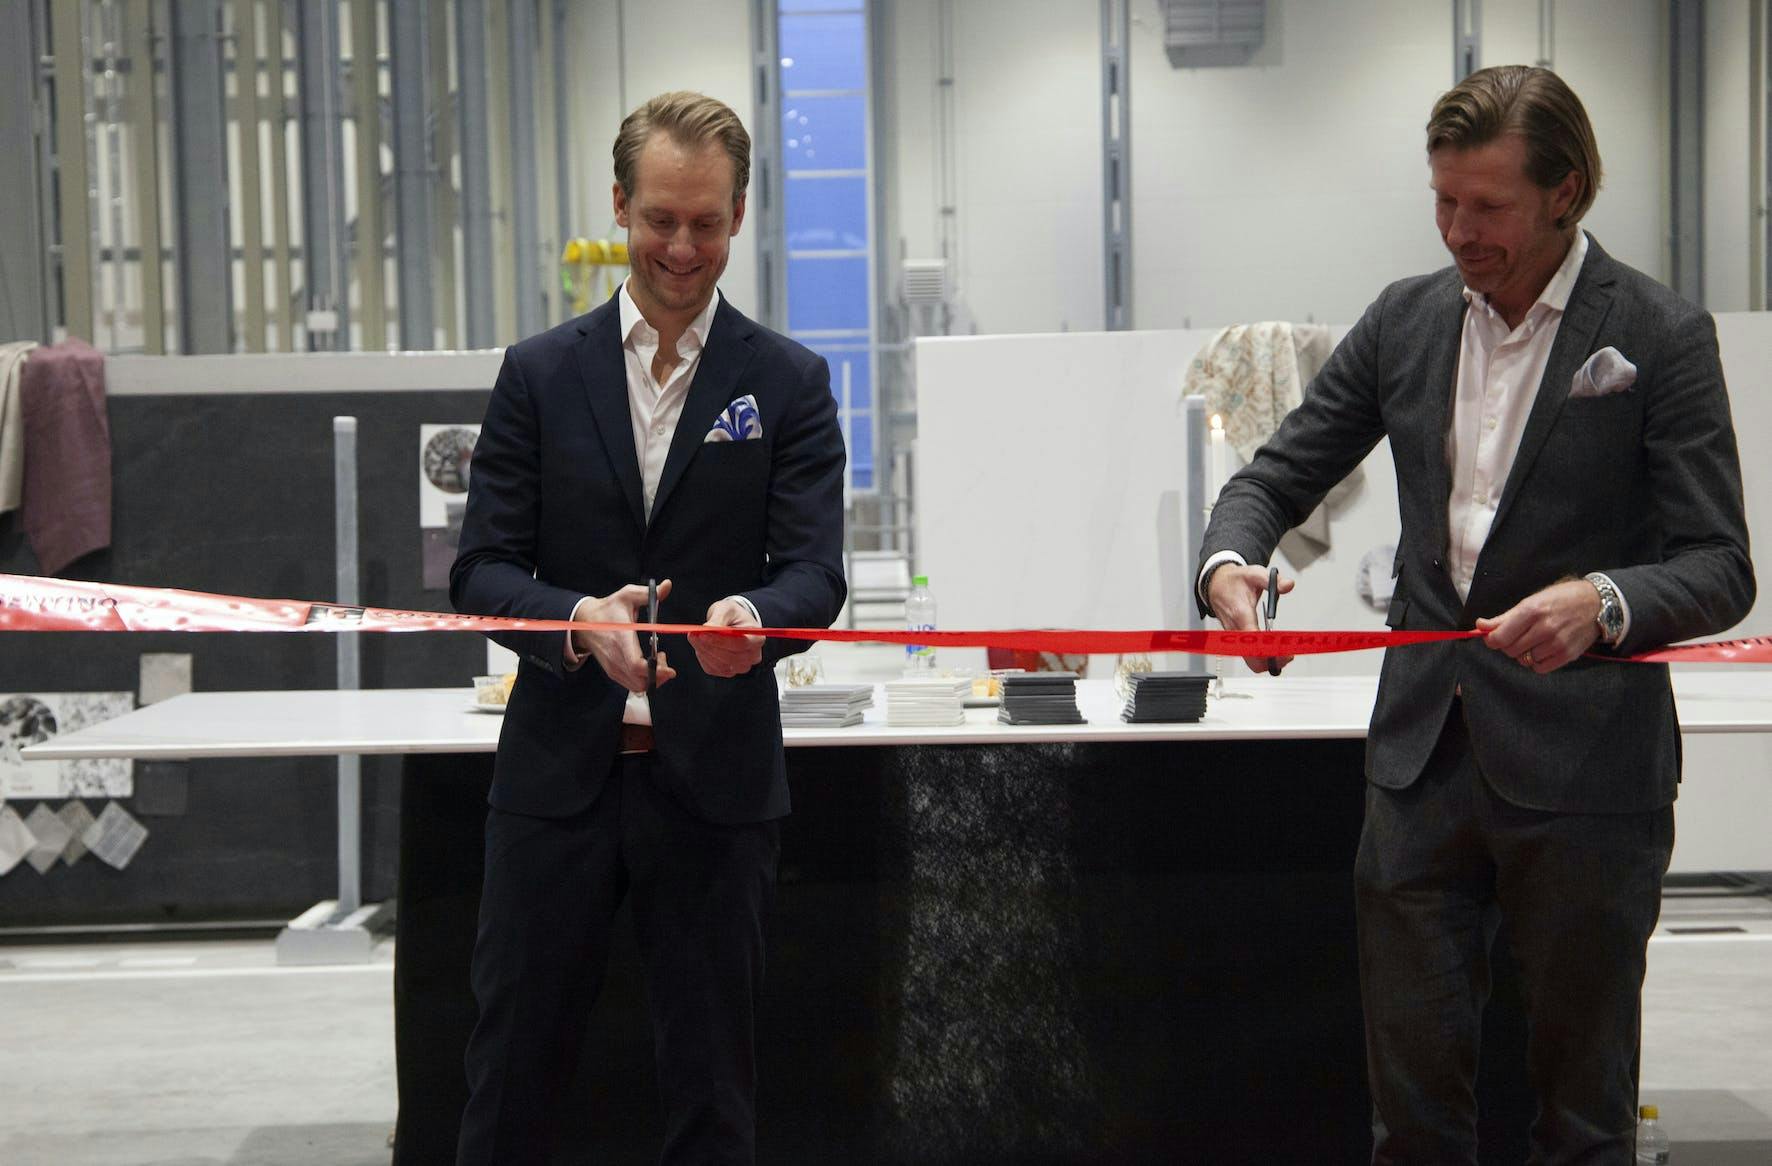 Image 31 of inauguracion Cosentino Center Estocolmo 2 1 in Cosentino Group opens new "Centre" in Stockholm and celebrates the end of a year of strong growth in Europe - Cosentino